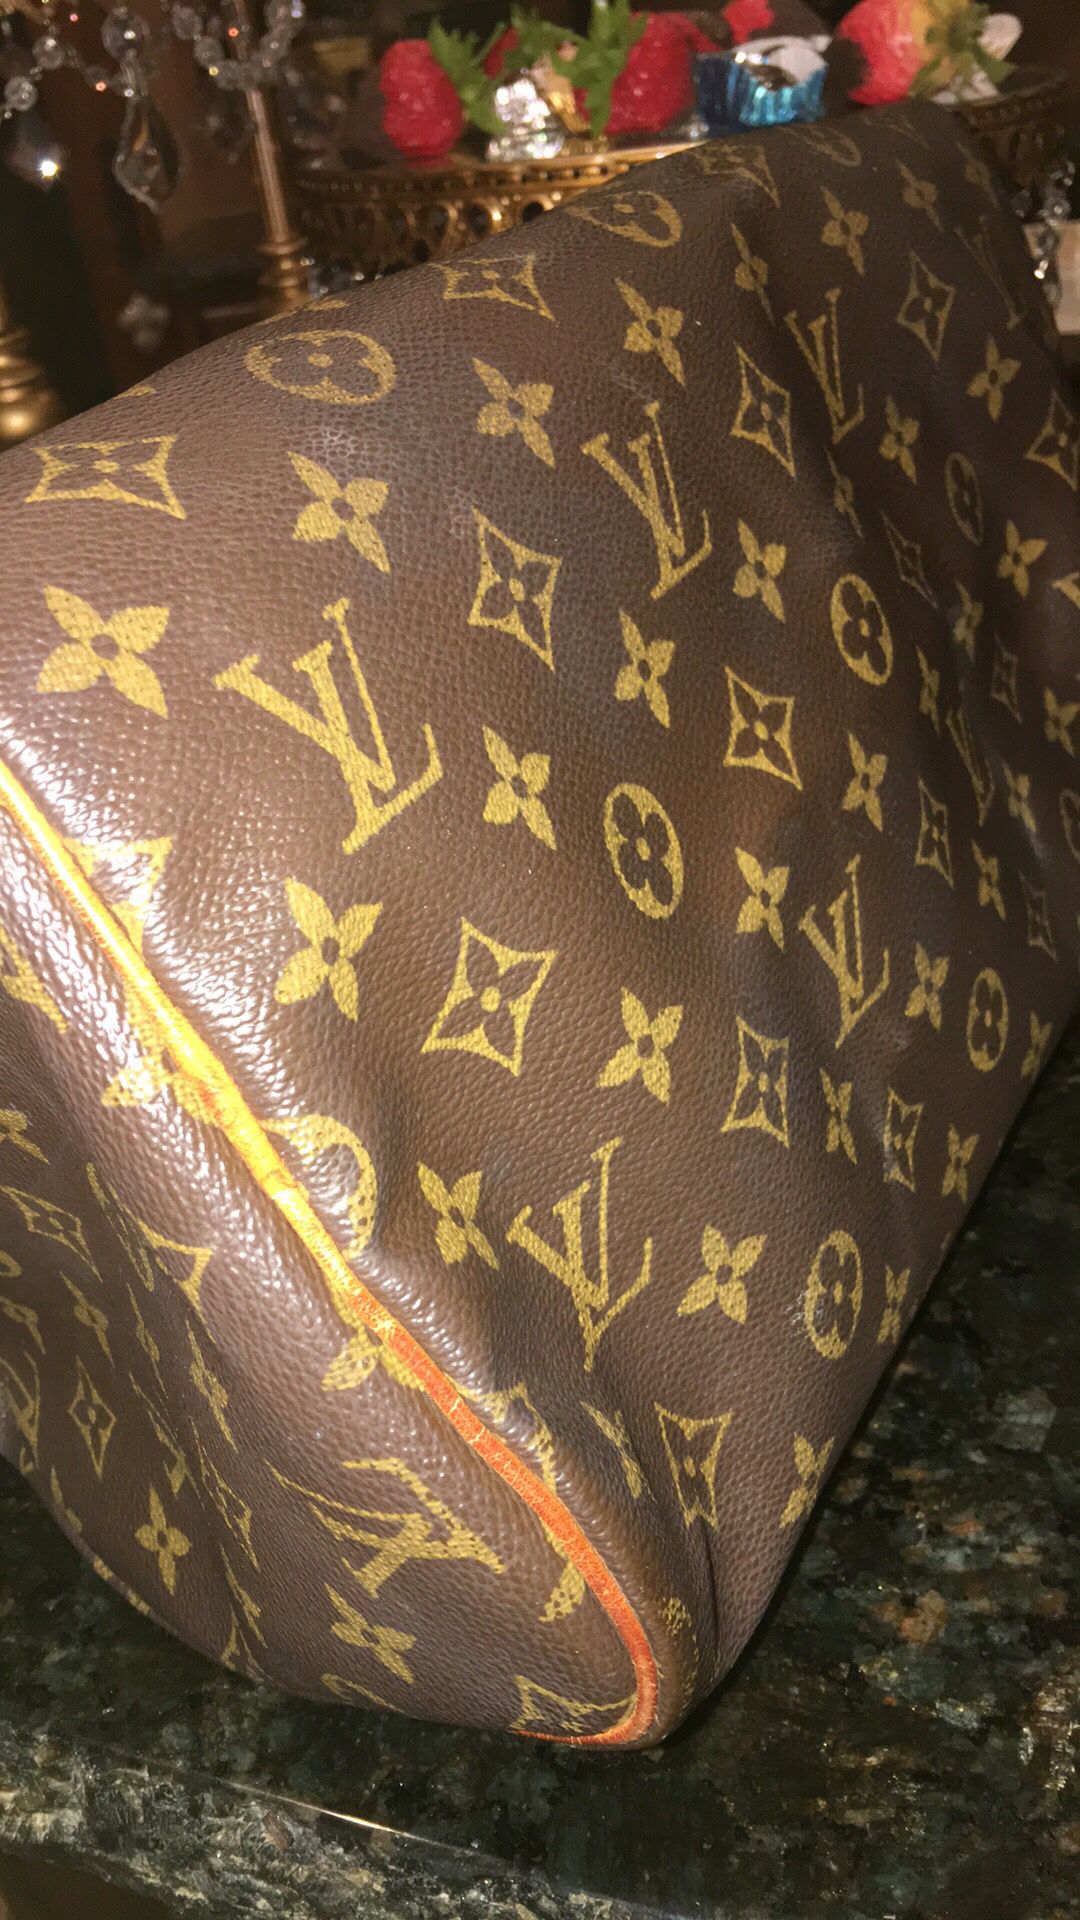 Authentic Louis Vuitton Speedy 35 Monogram with Purchase Receipt and Tags  for Sale in Oakland, CA - OfferUp